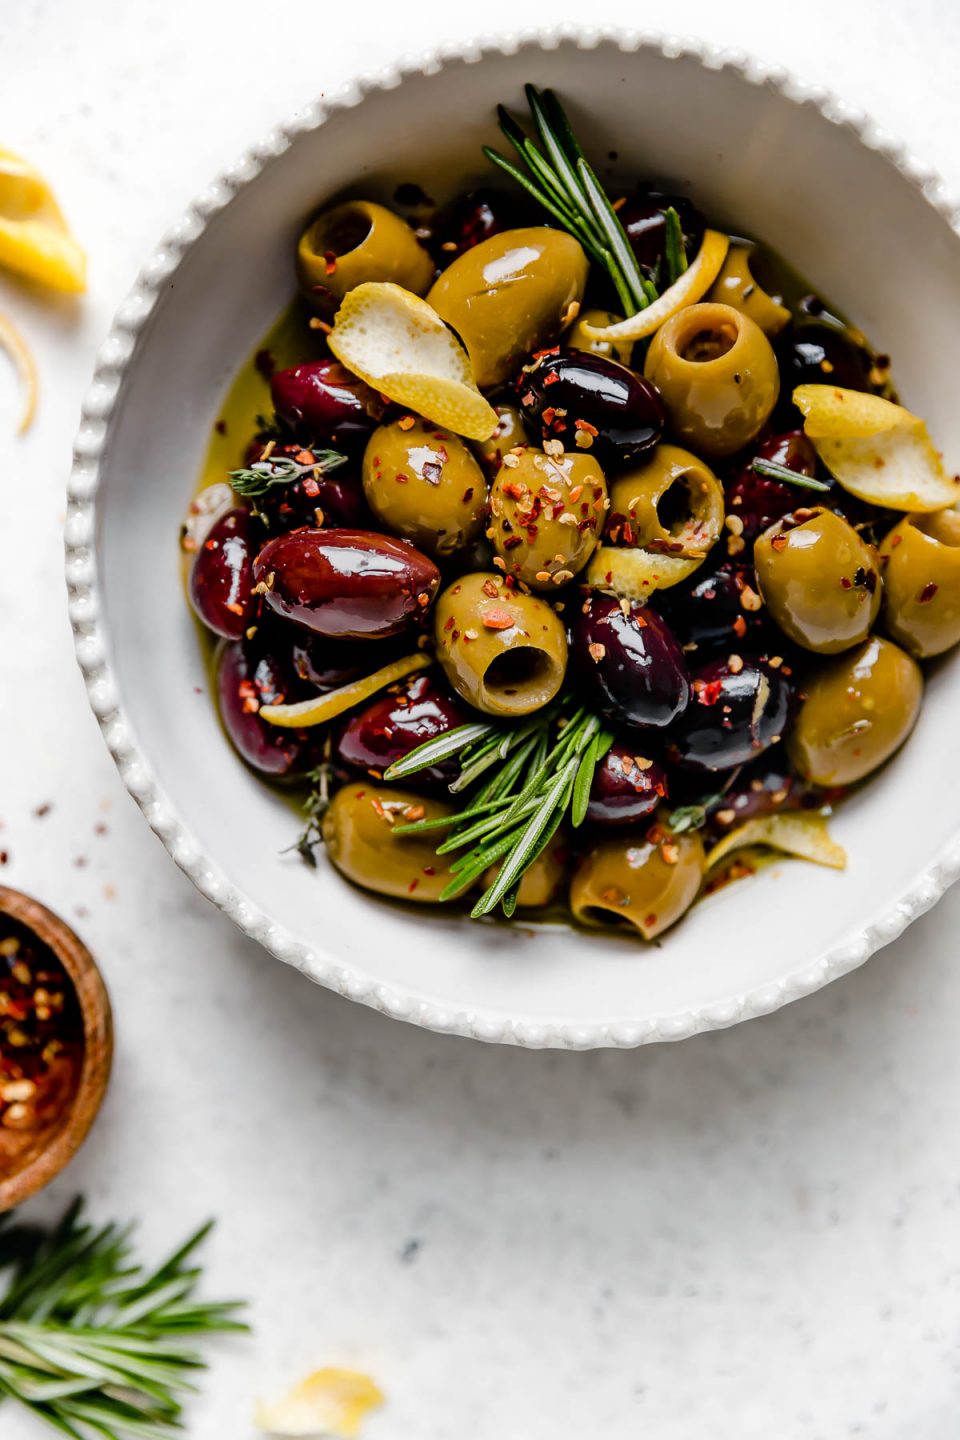 Homemade marinated olives served in a white dish with scalloped edges. The bowl is atop a white surface, surrounded by fresh rosemary, lemon peel, & a small wooden bowl with red chili flakes.